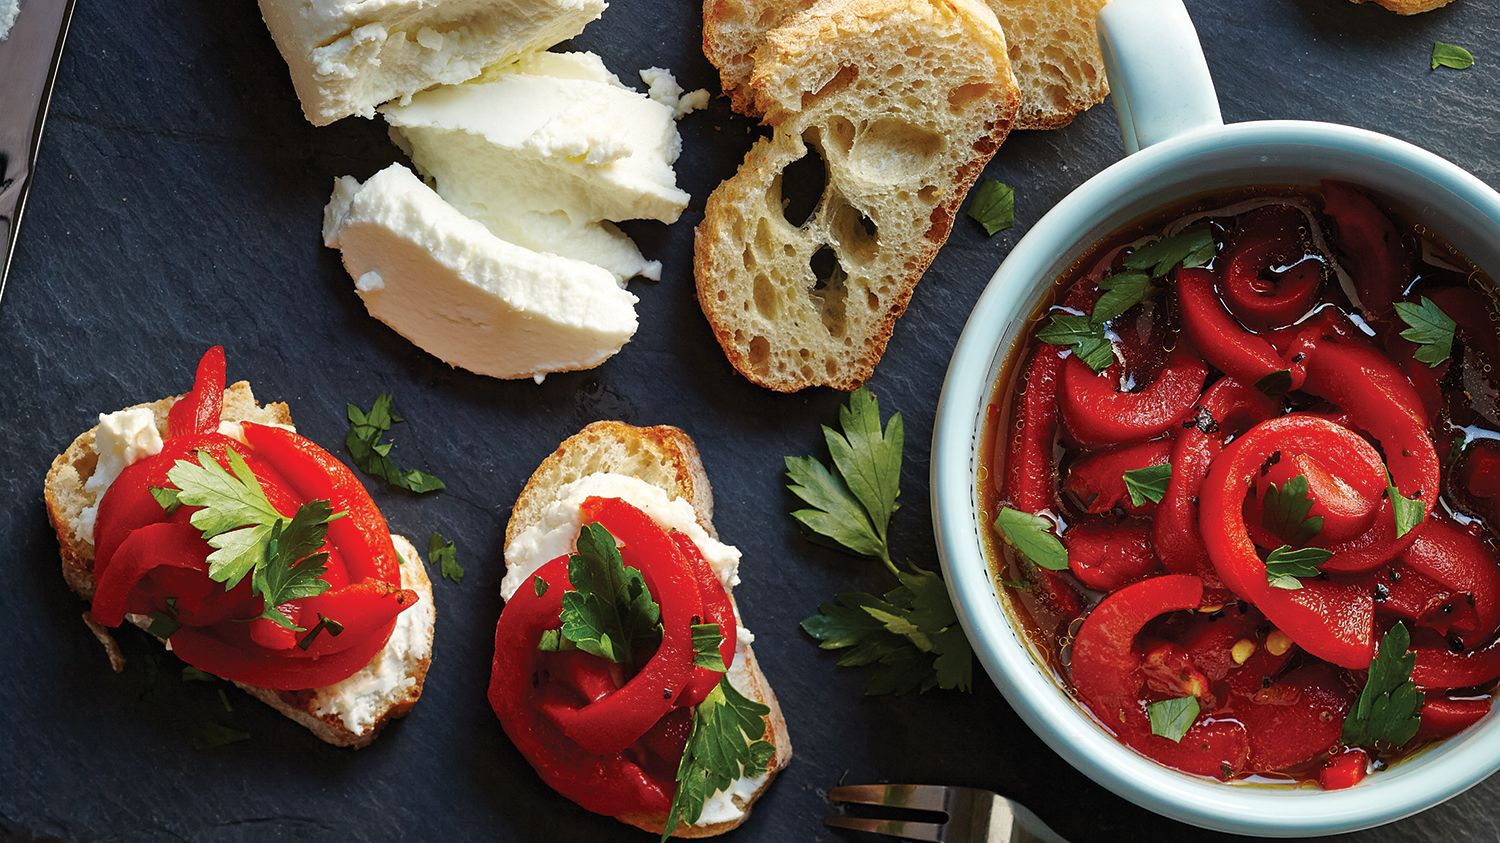 Marinated Roasted Red Peppers & Goat Cheese on Baguette